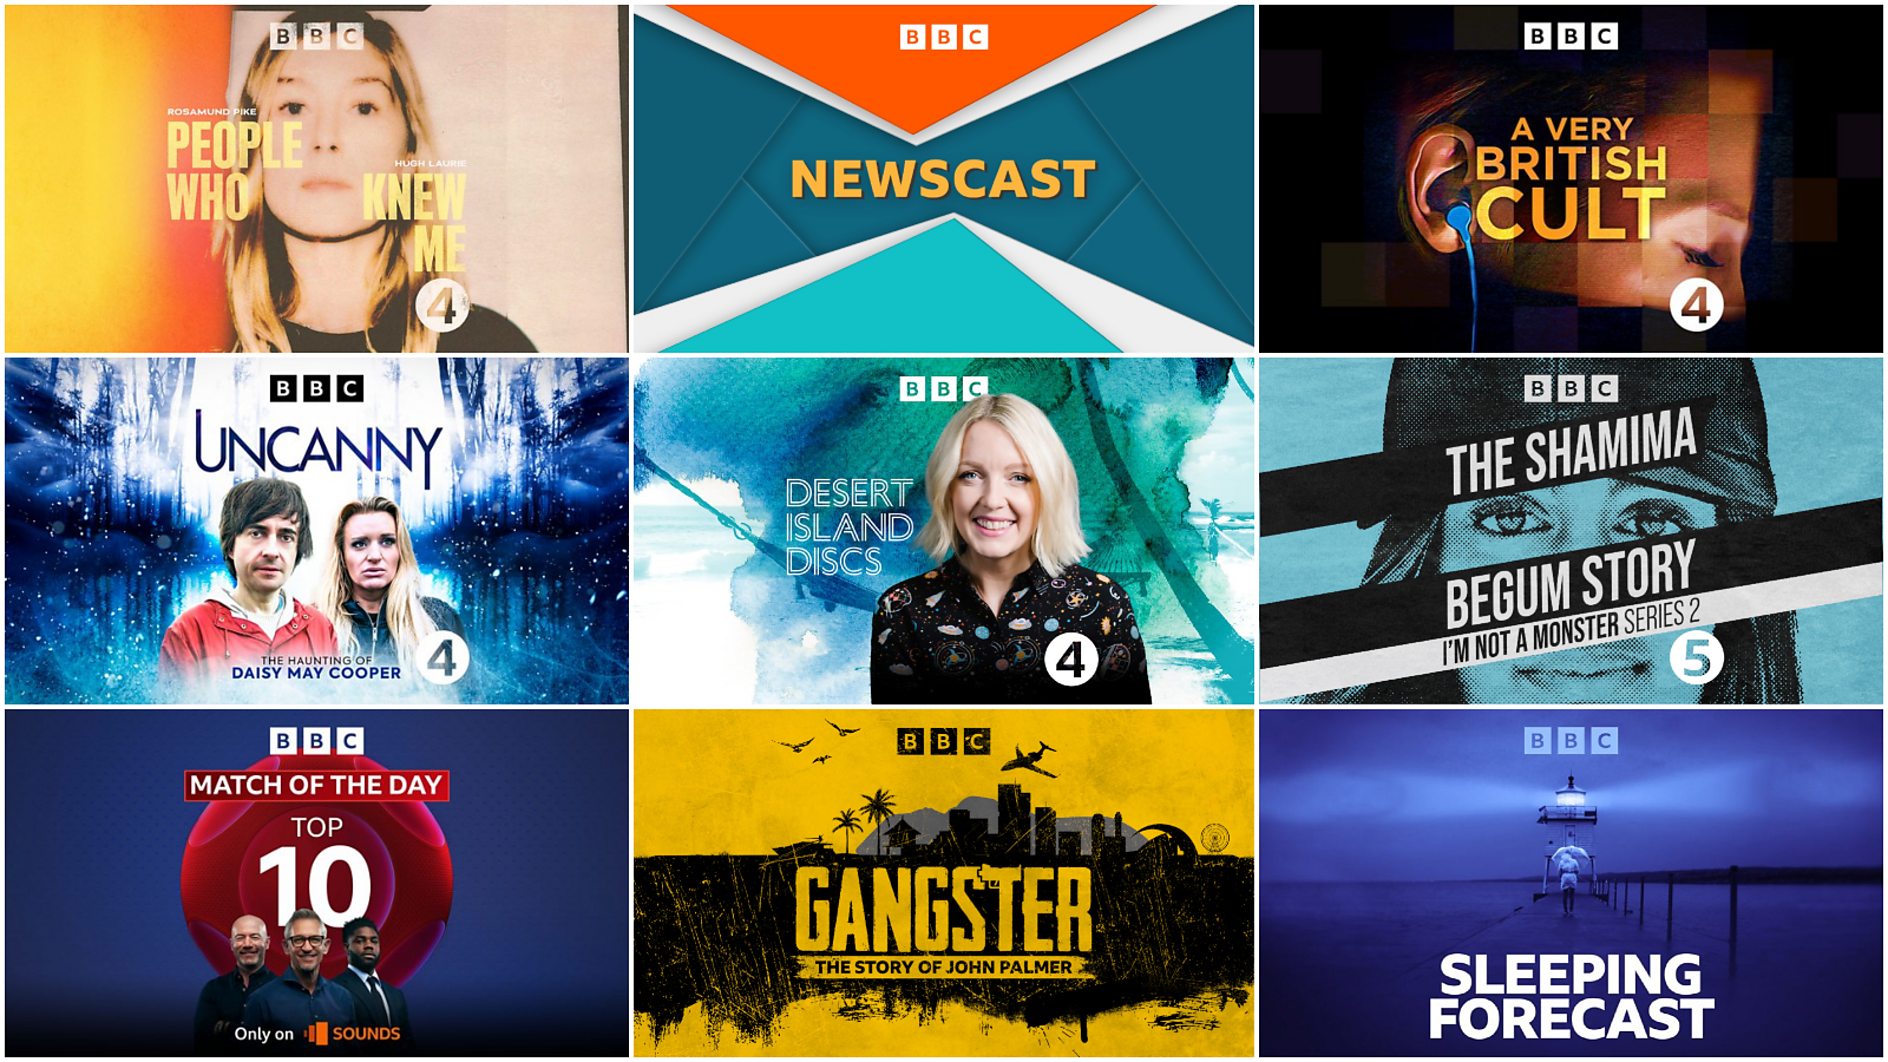 BBC Sounds reveals their top 10 most popular podcasts of 2023